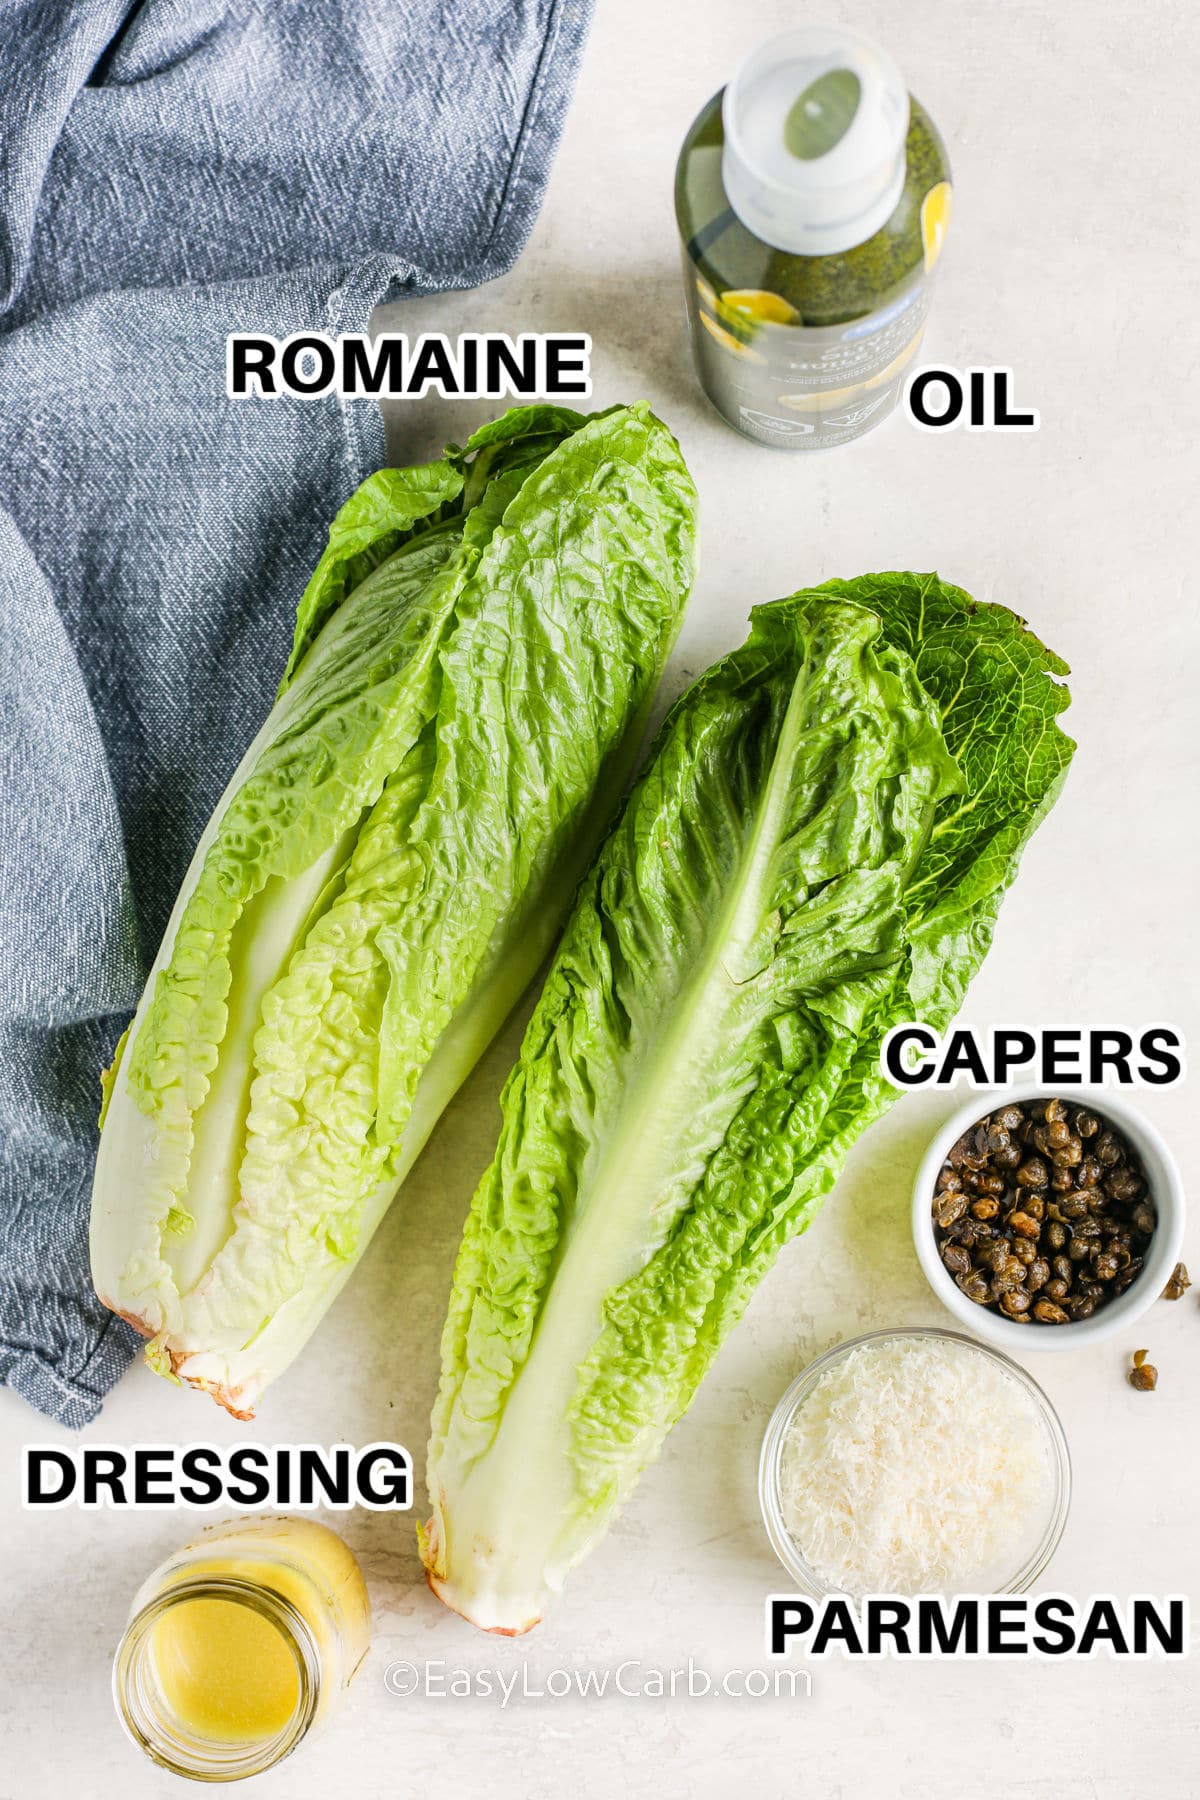 ingredients assembled to make grilled romaine salad including romaine, dressing, parmesan, capers, and oil